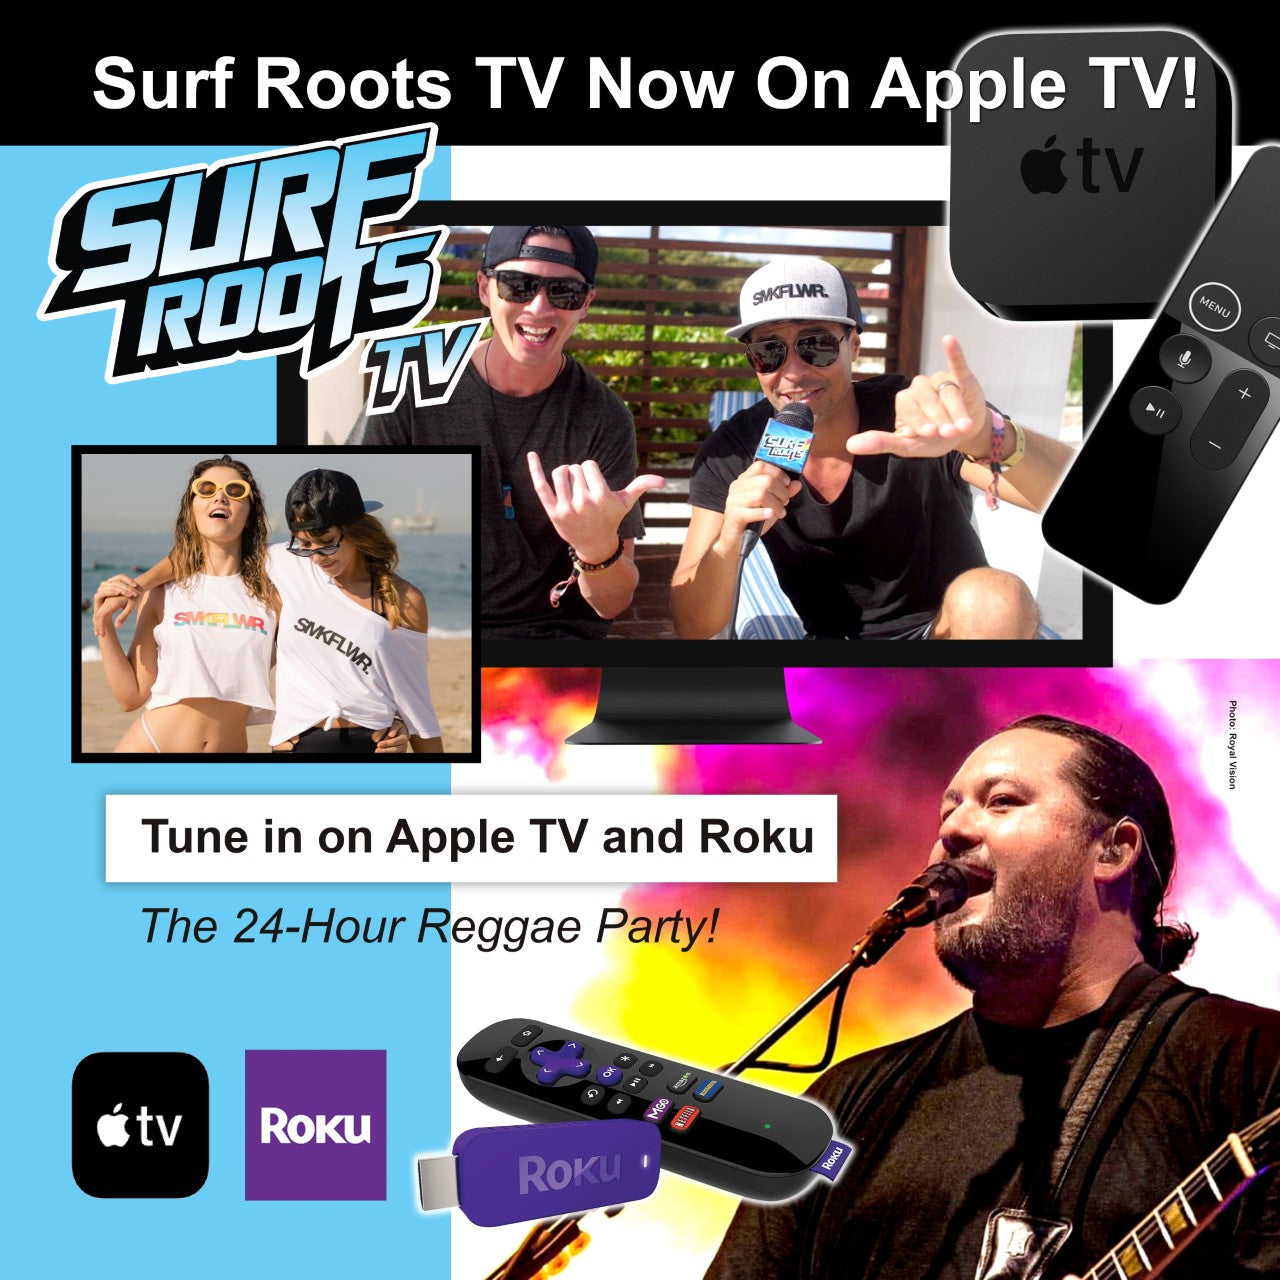 Surf Roots TV expanding to Apple TV on Feb 6th!